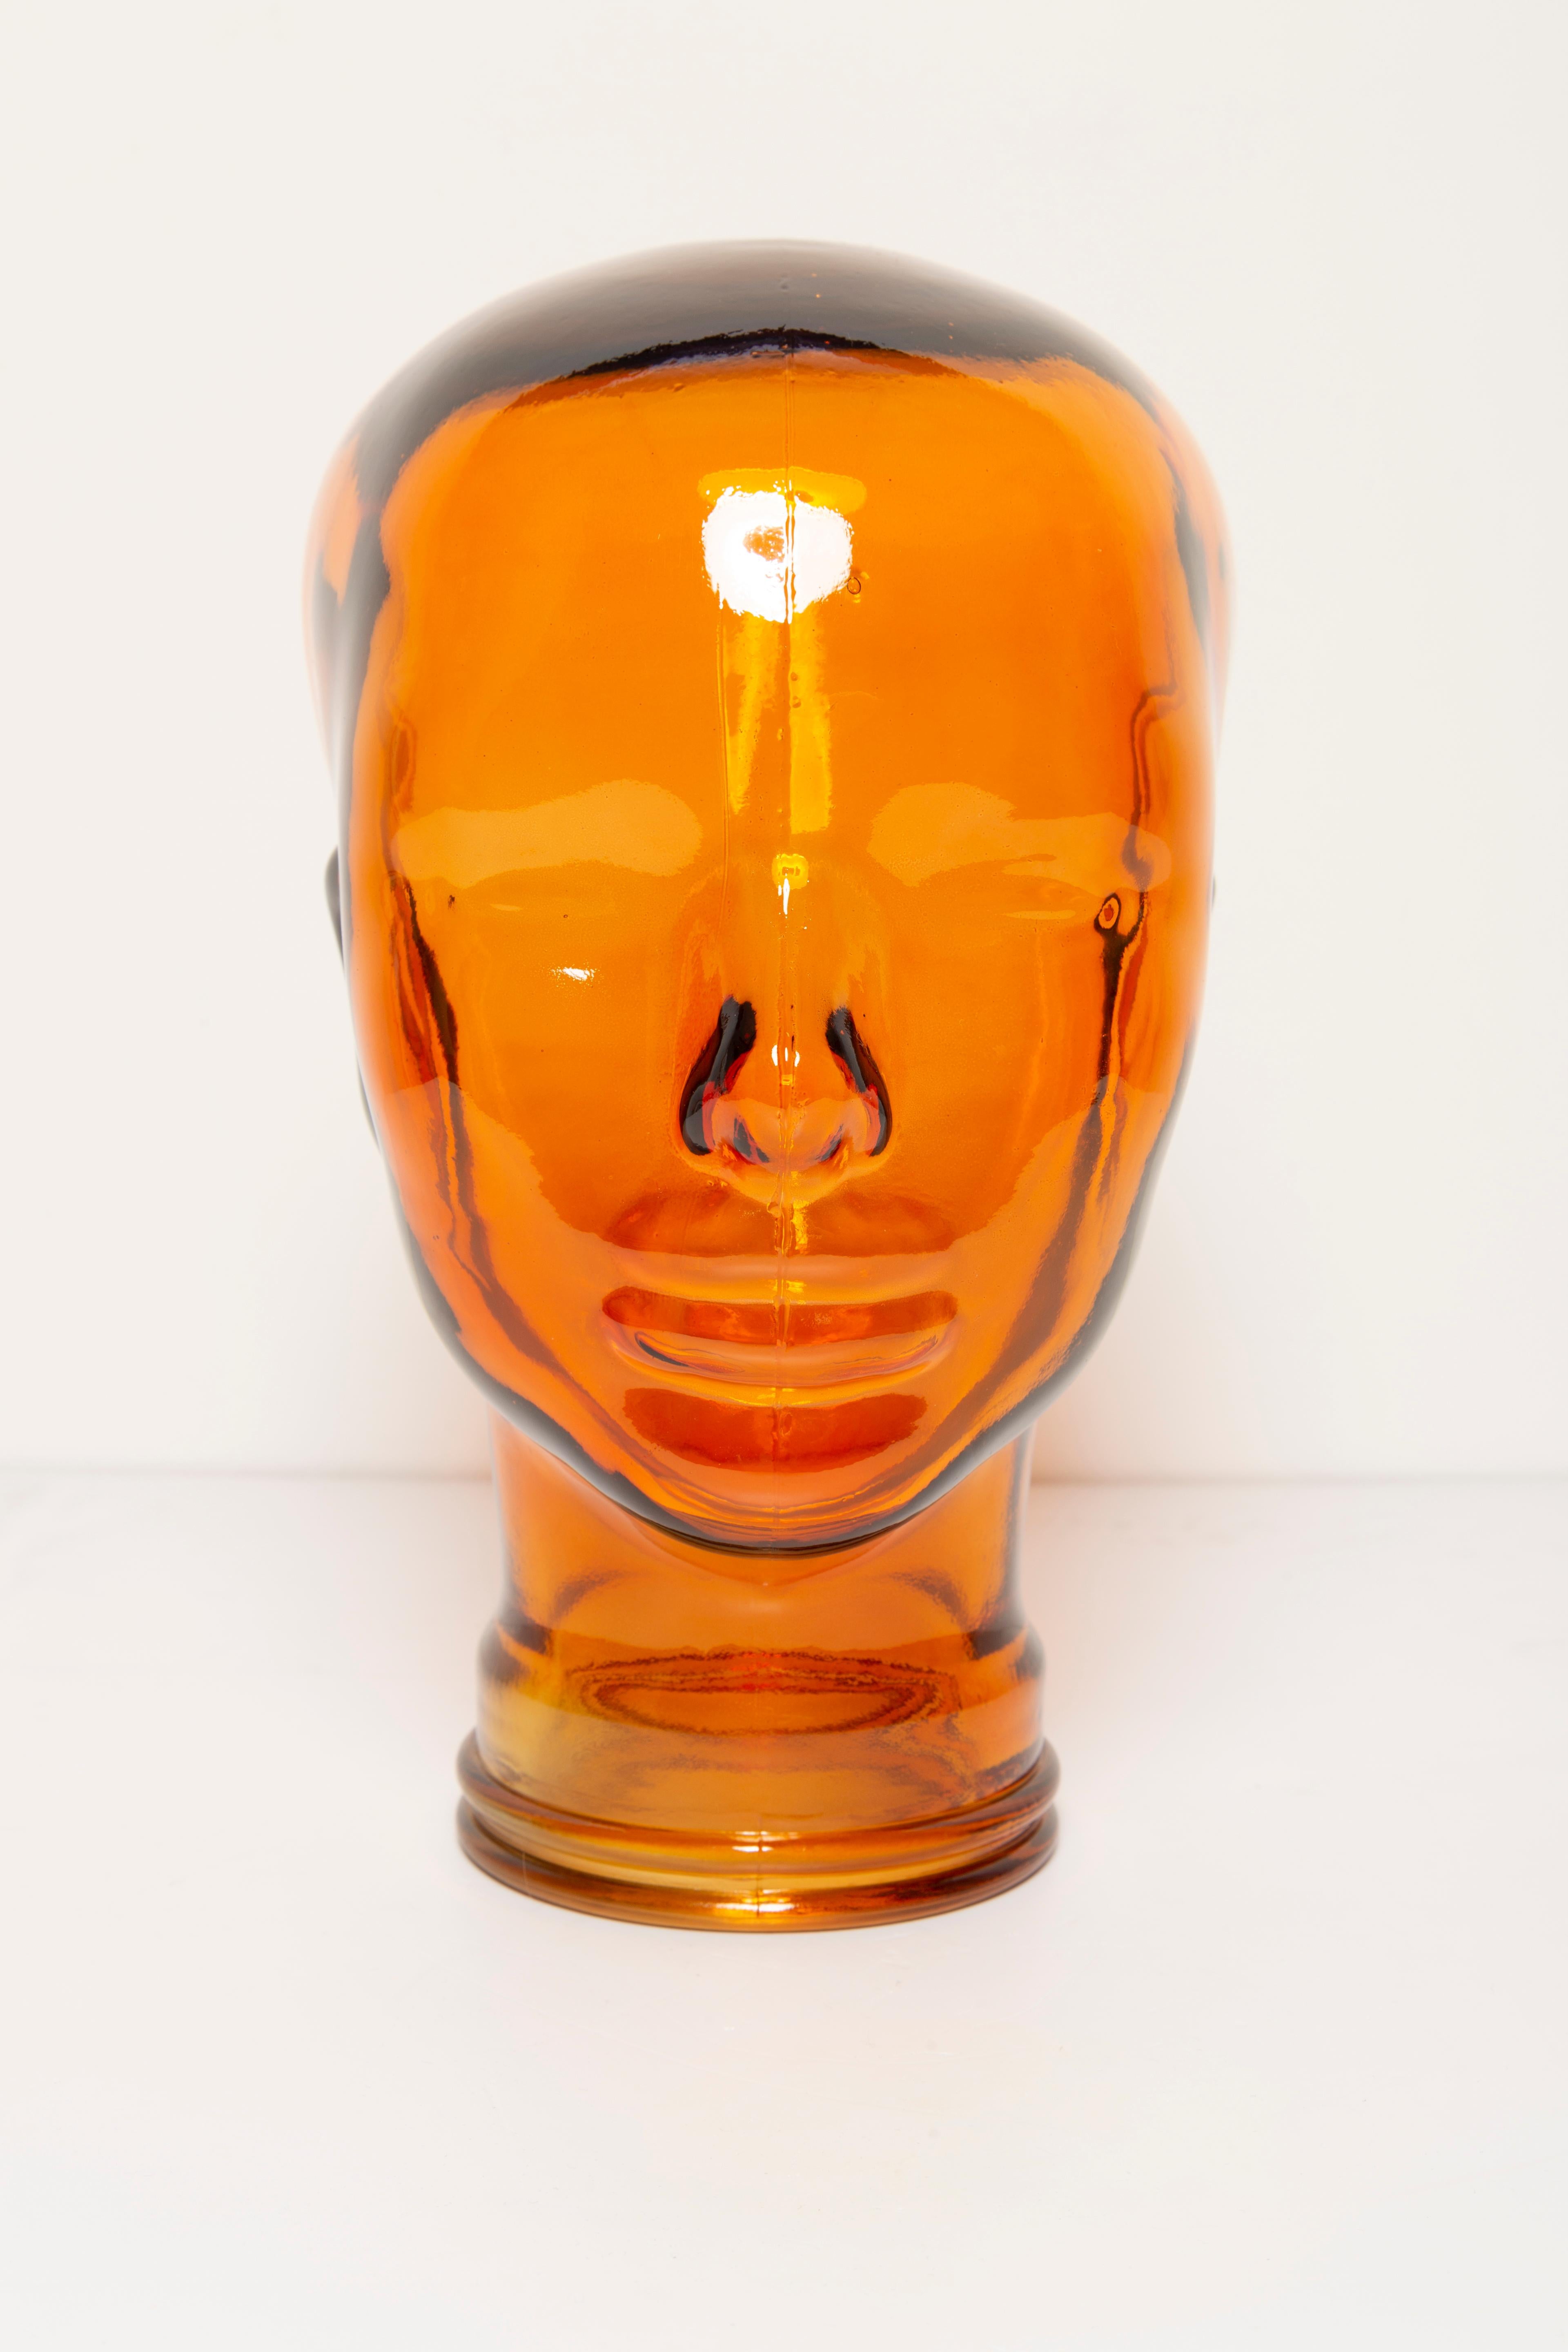 Life-size glass head in a unique orange color. Produced in a German steelworks in the 1970s. Perfect condition. A perfect addition to the interior, photo prop, display or headphone stand.